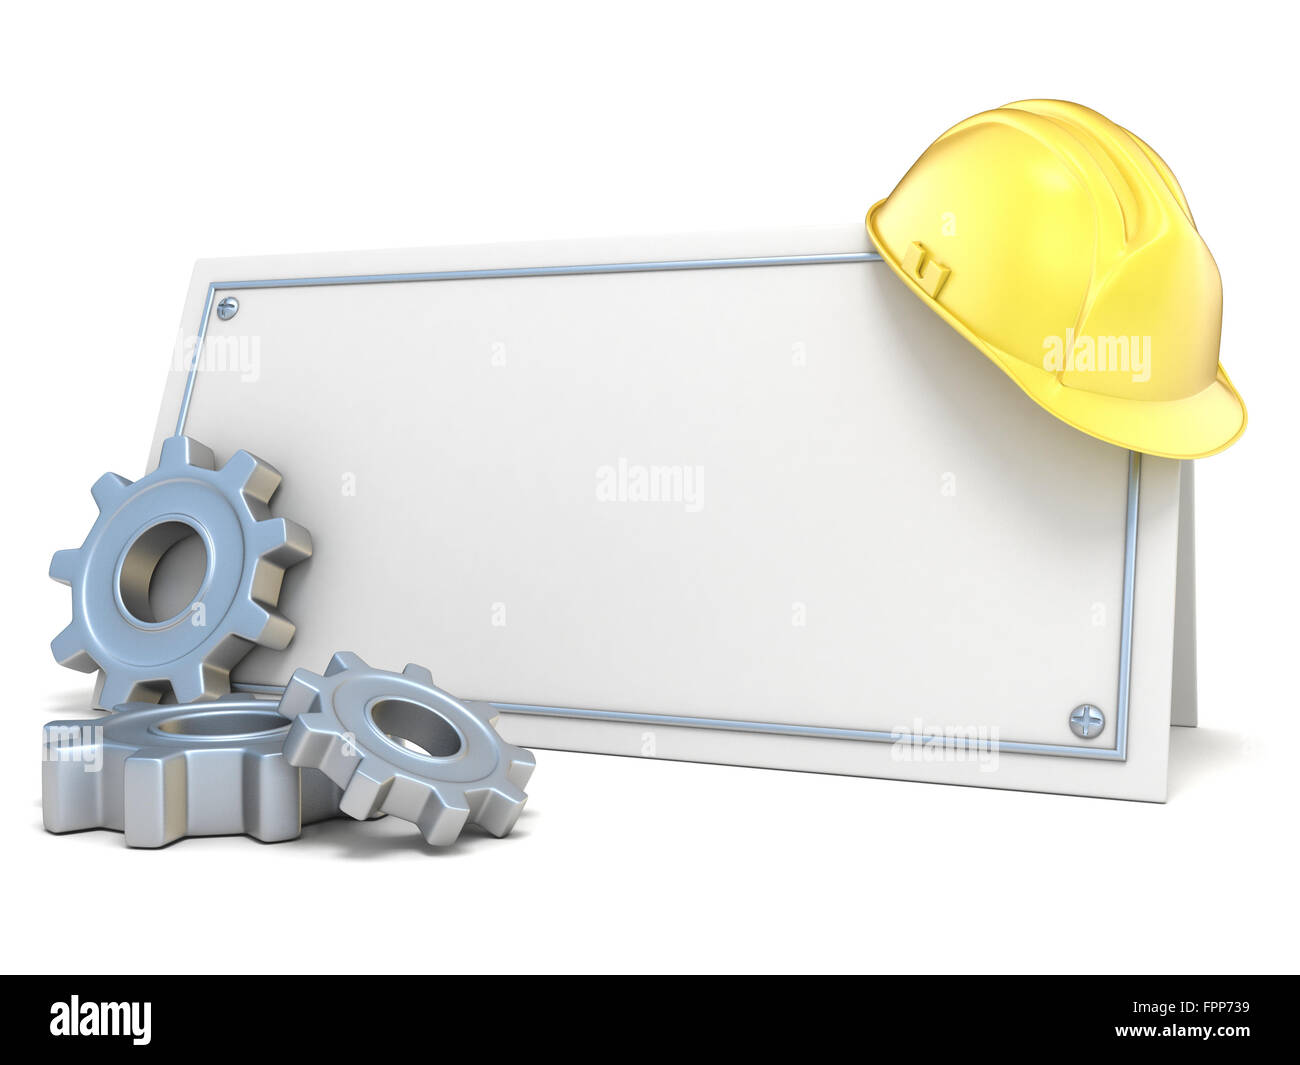 Construction helmet and gear wheels, on blank card. 3D render illustration isolated on white background Stock Photo